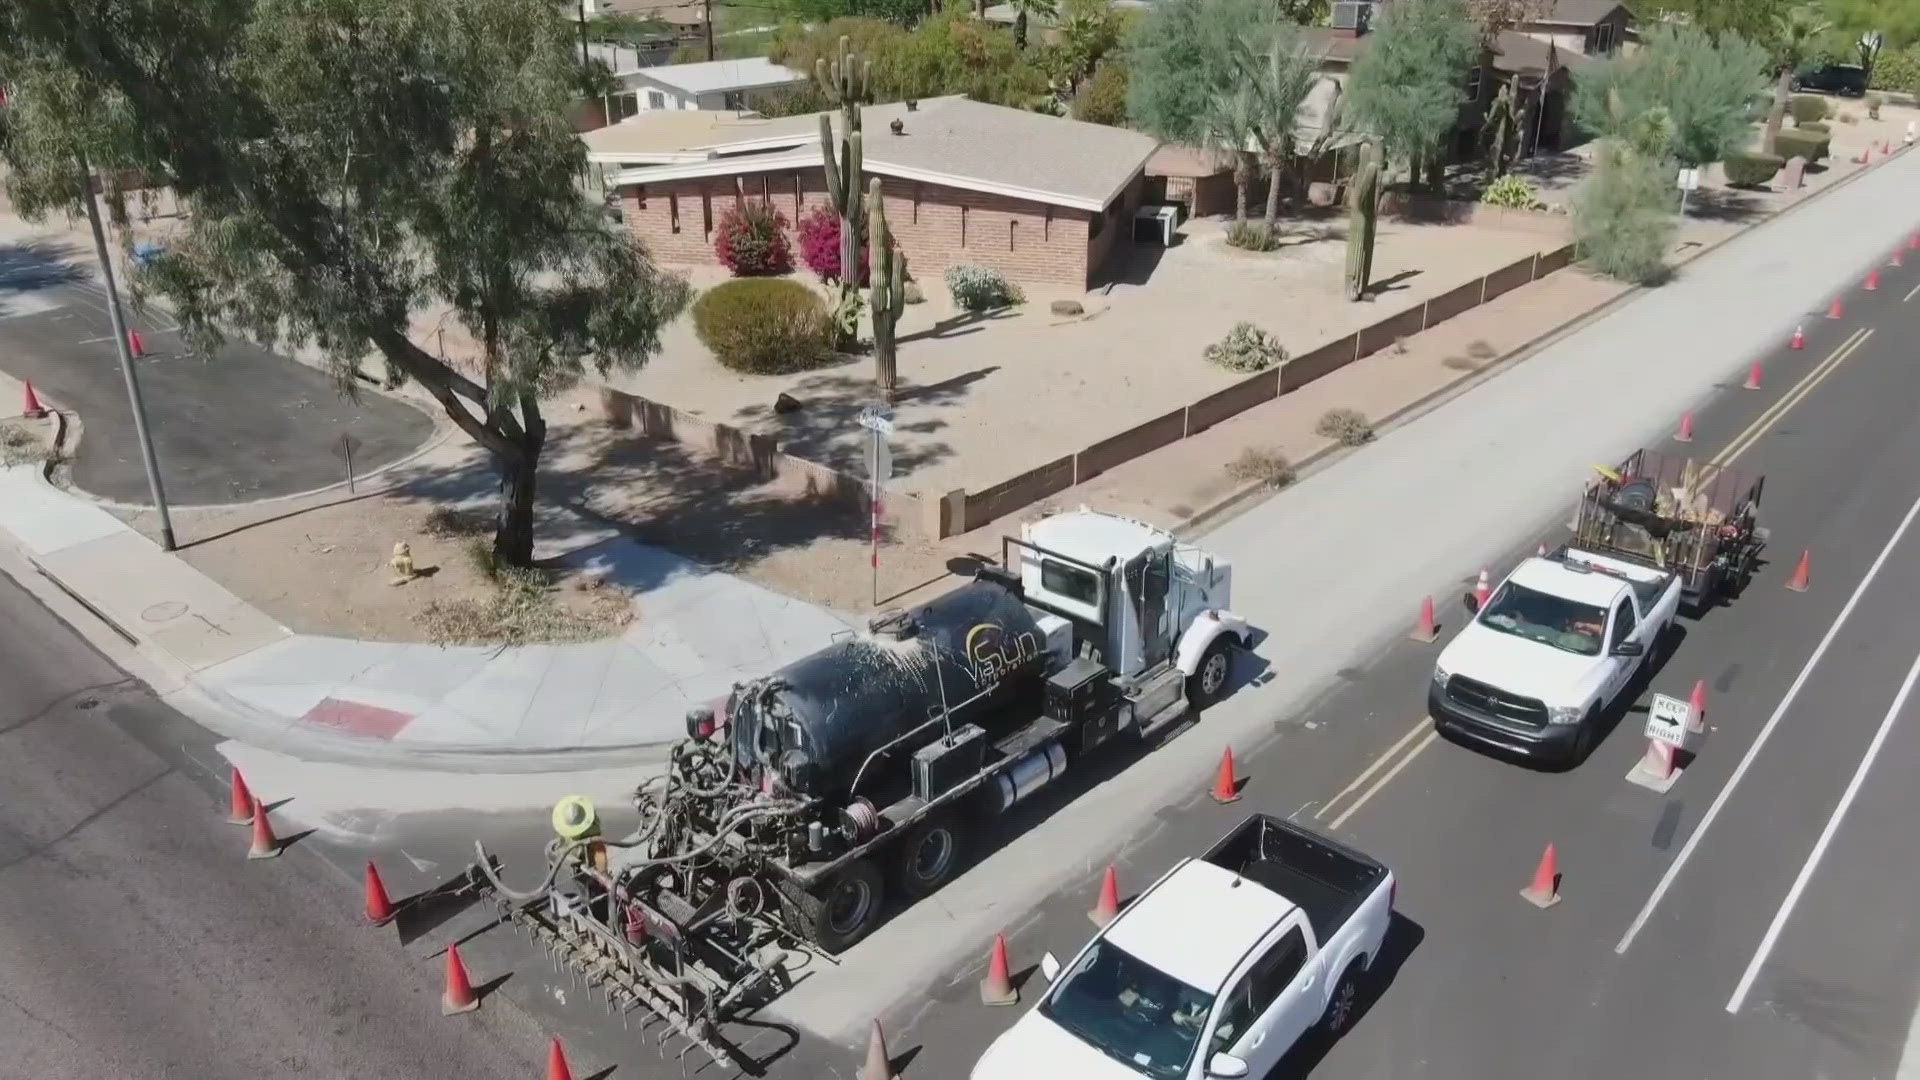 A new "Cool pavement" project is designed to help keep the road temperatures down in some Phoenix neighborhoods. Stella Sun has the details.